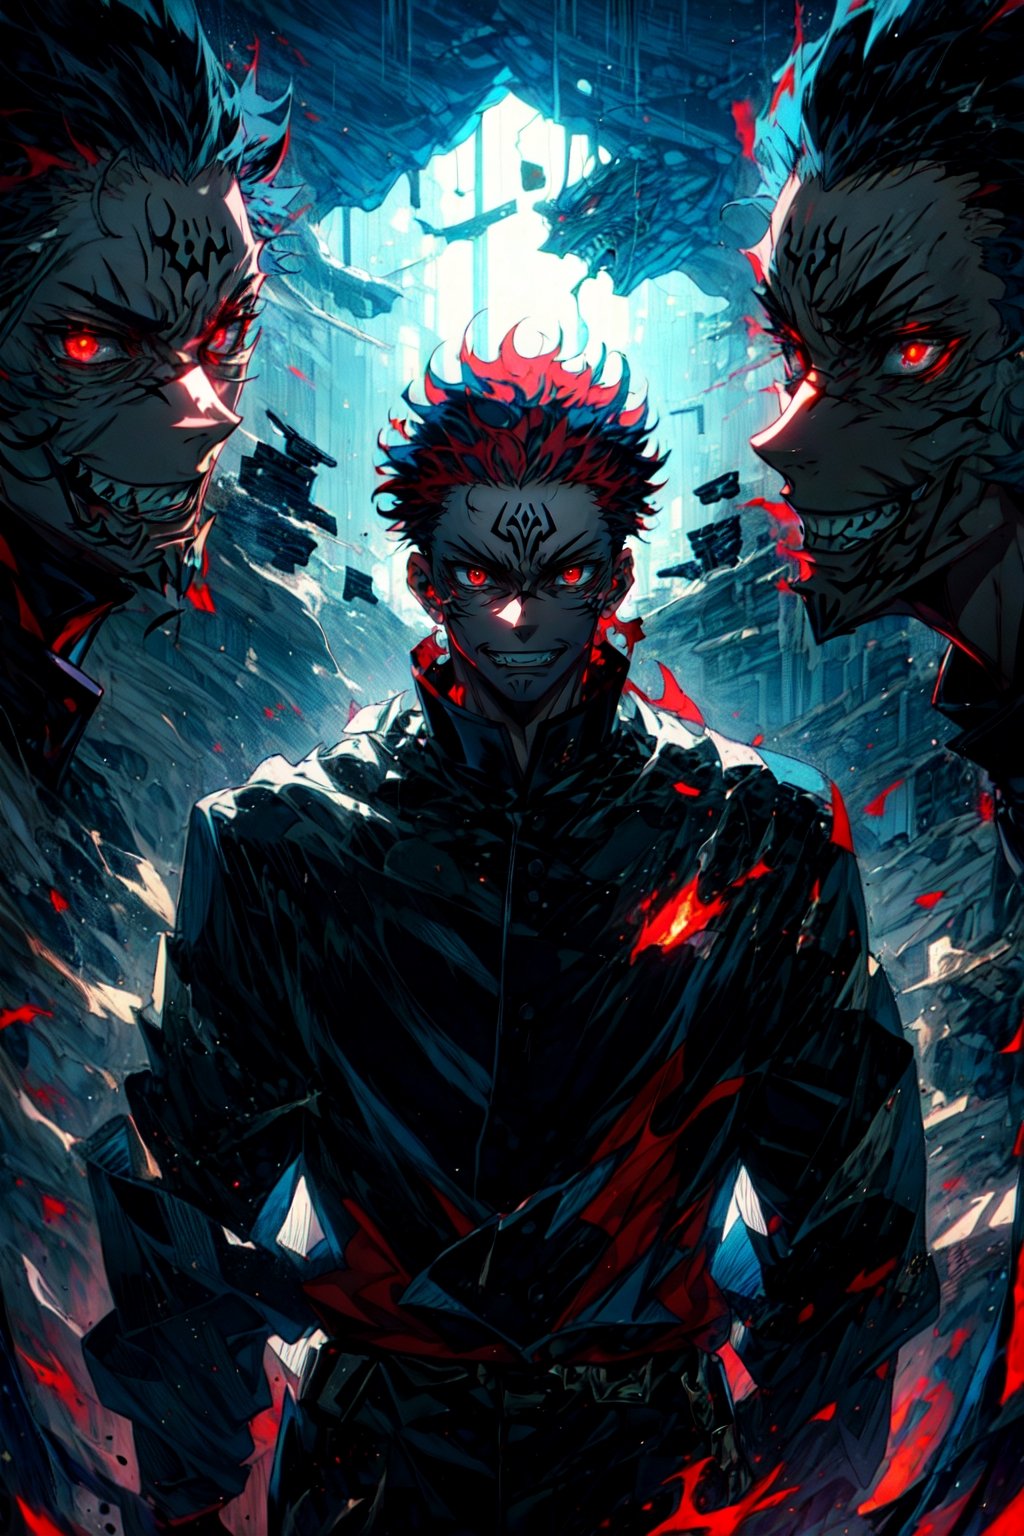 (masterpiece, best quality, official art:1.2), legendary curse, (Ryomen Sukuna:1.3), malevolent aura, sinister grin, (multi-eyed visage:1.1), intricate tattoos, long spiky fingers, black and red attire, domain expansion, fearsome presence, detailed background, cursed energy, powerful sorcerer, intense conflict, dark and mystical ambiance, captivating character design, iconic villain from Jujutsu Kaisen,SUKUNA